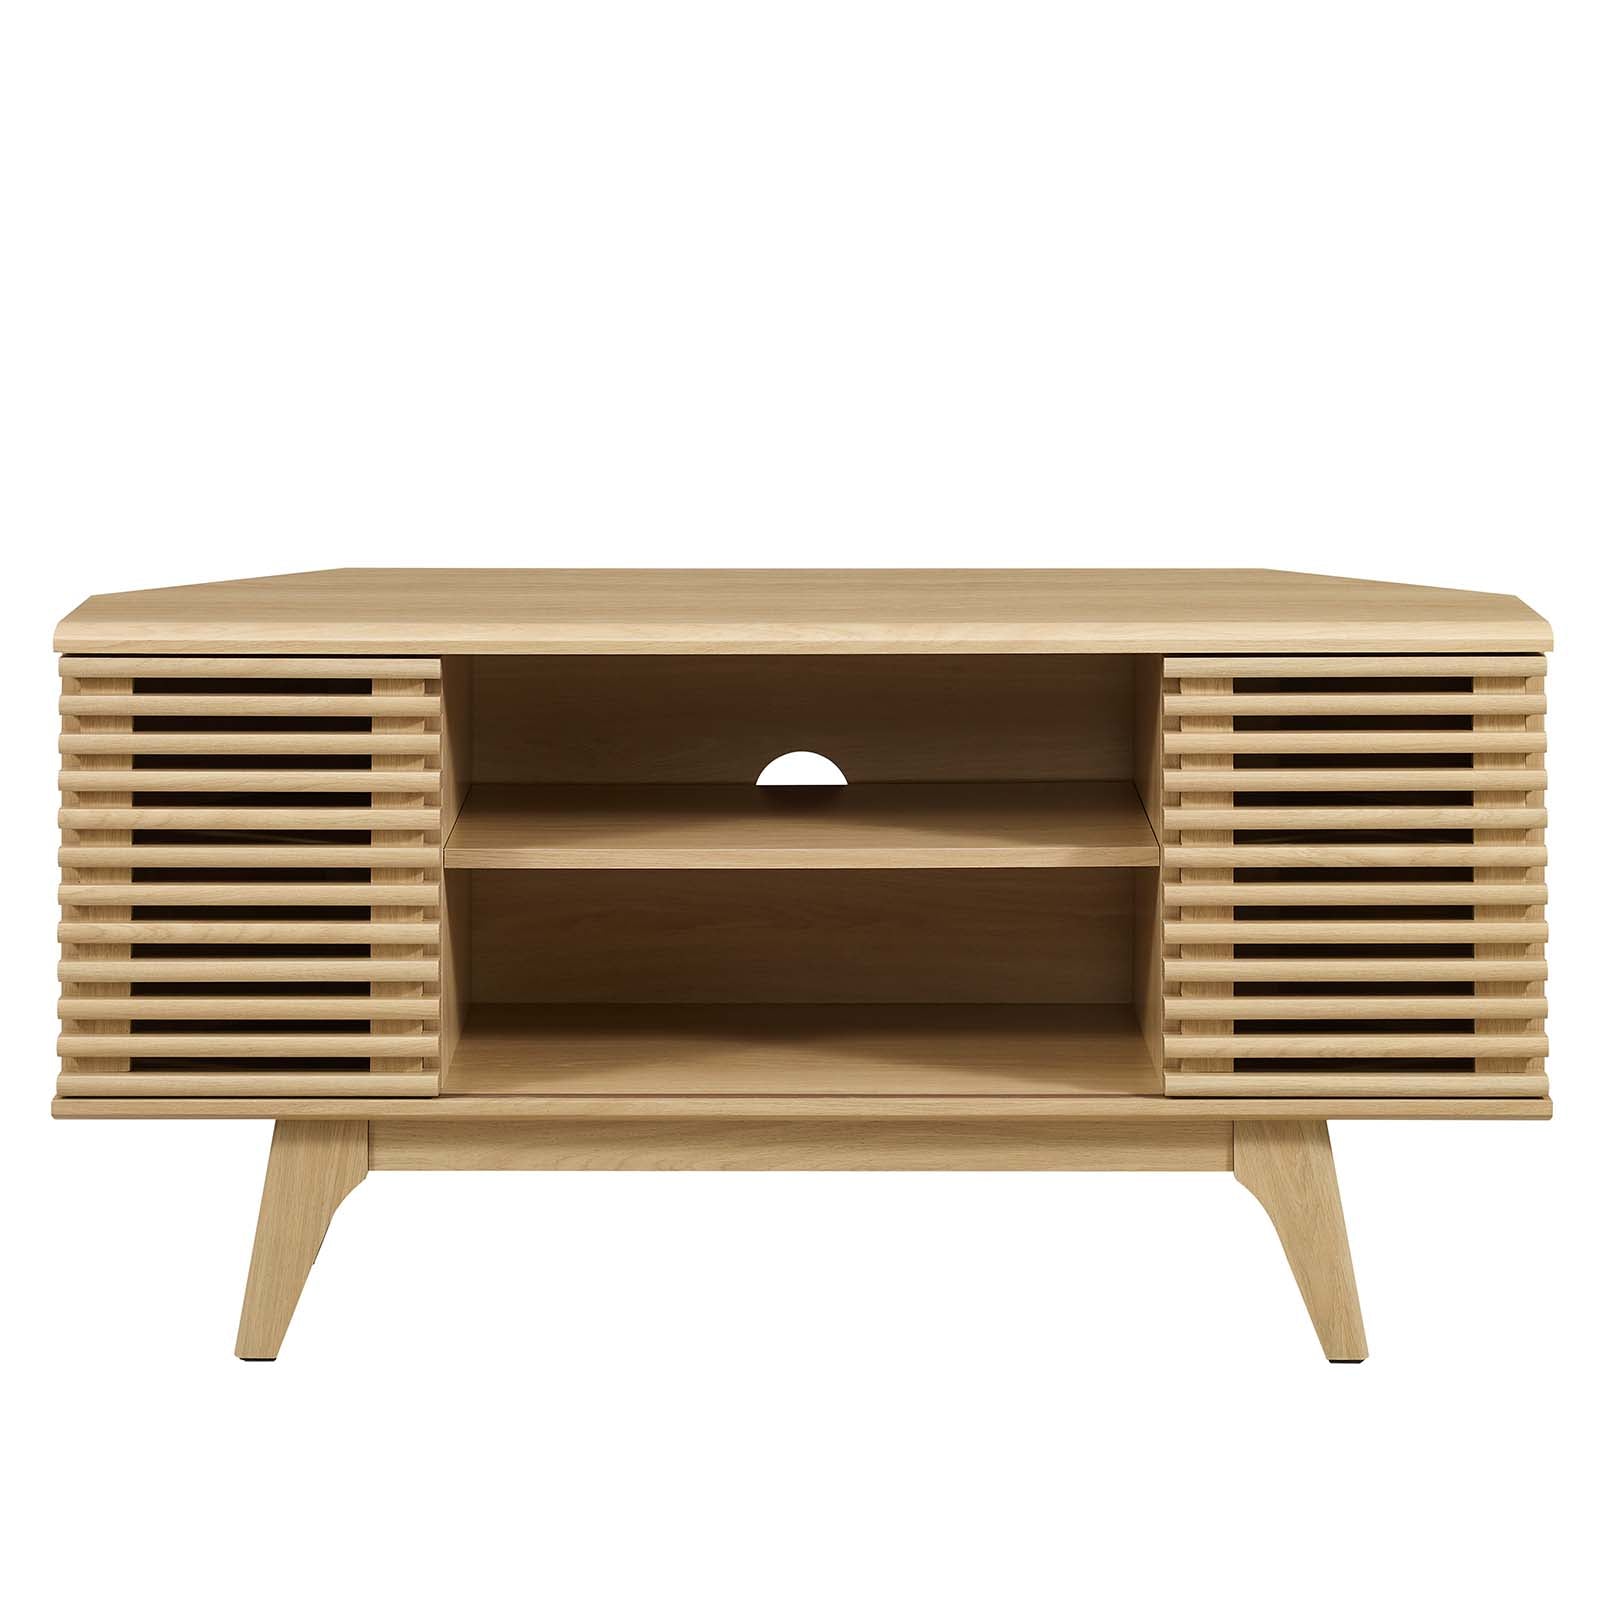 Modern Oak TV Cabinet with Storage Space